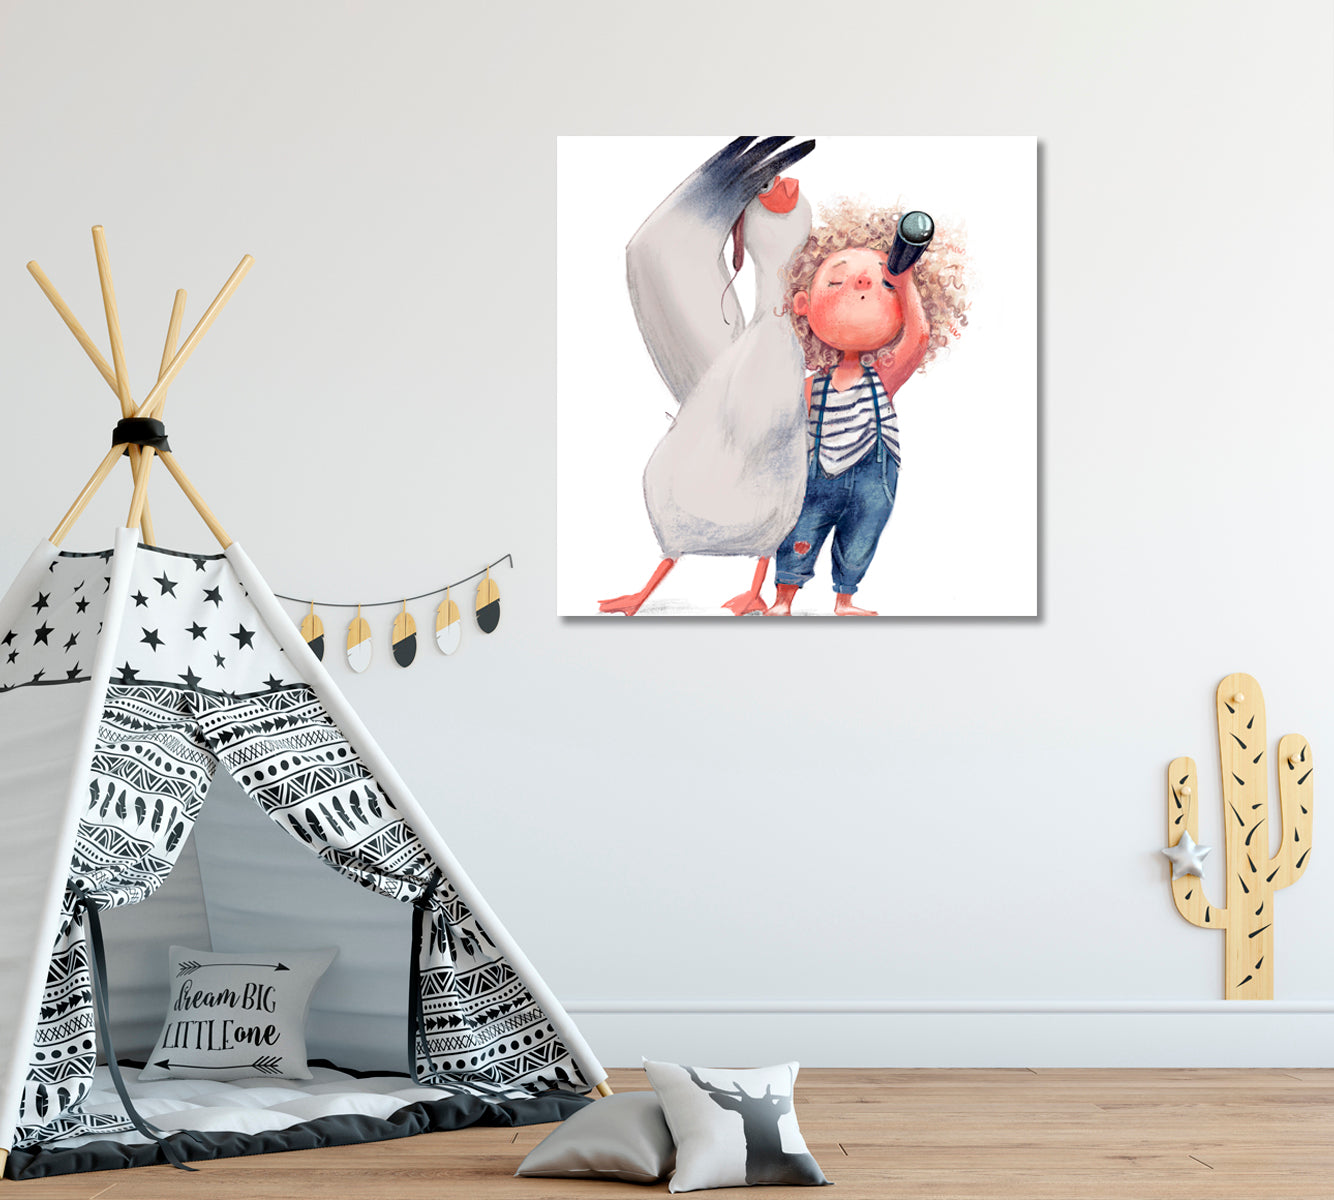 Friends Gull with Girl Canvas Print ArtLexy 1 Panel 12"x12" inches 